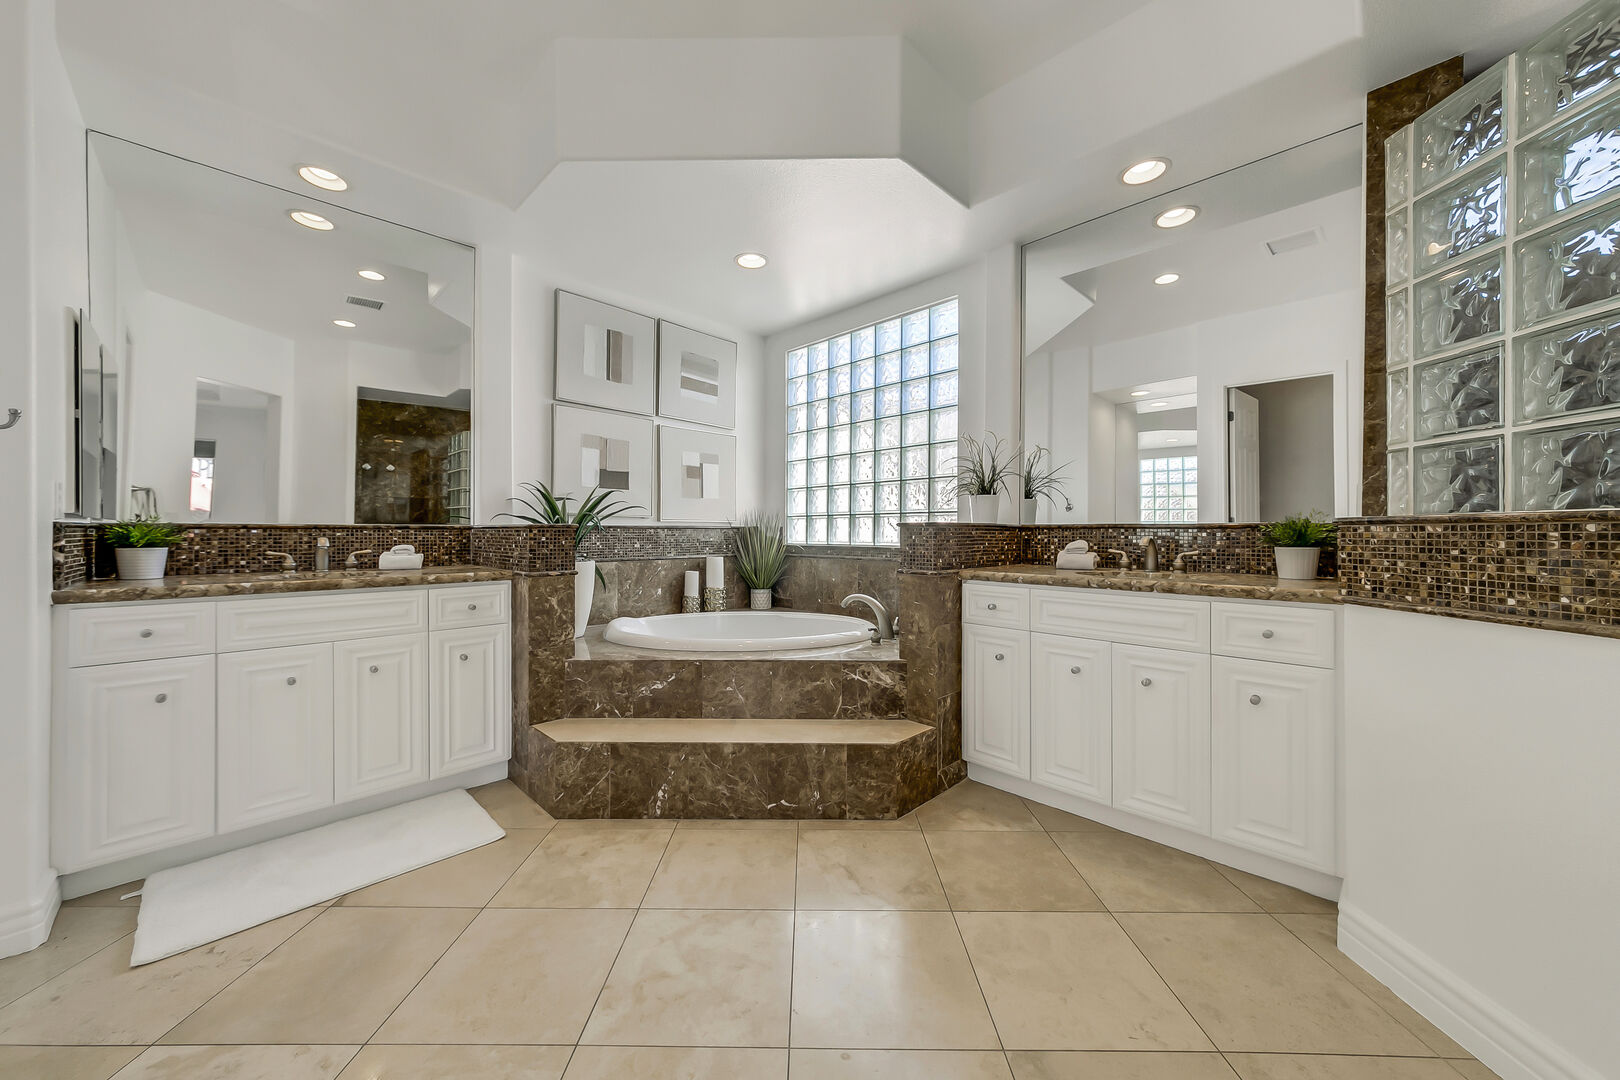 Master Suite 1 bathroom features a Vanity, dual his & hers sinks, step in shower, and huge soaking tub!